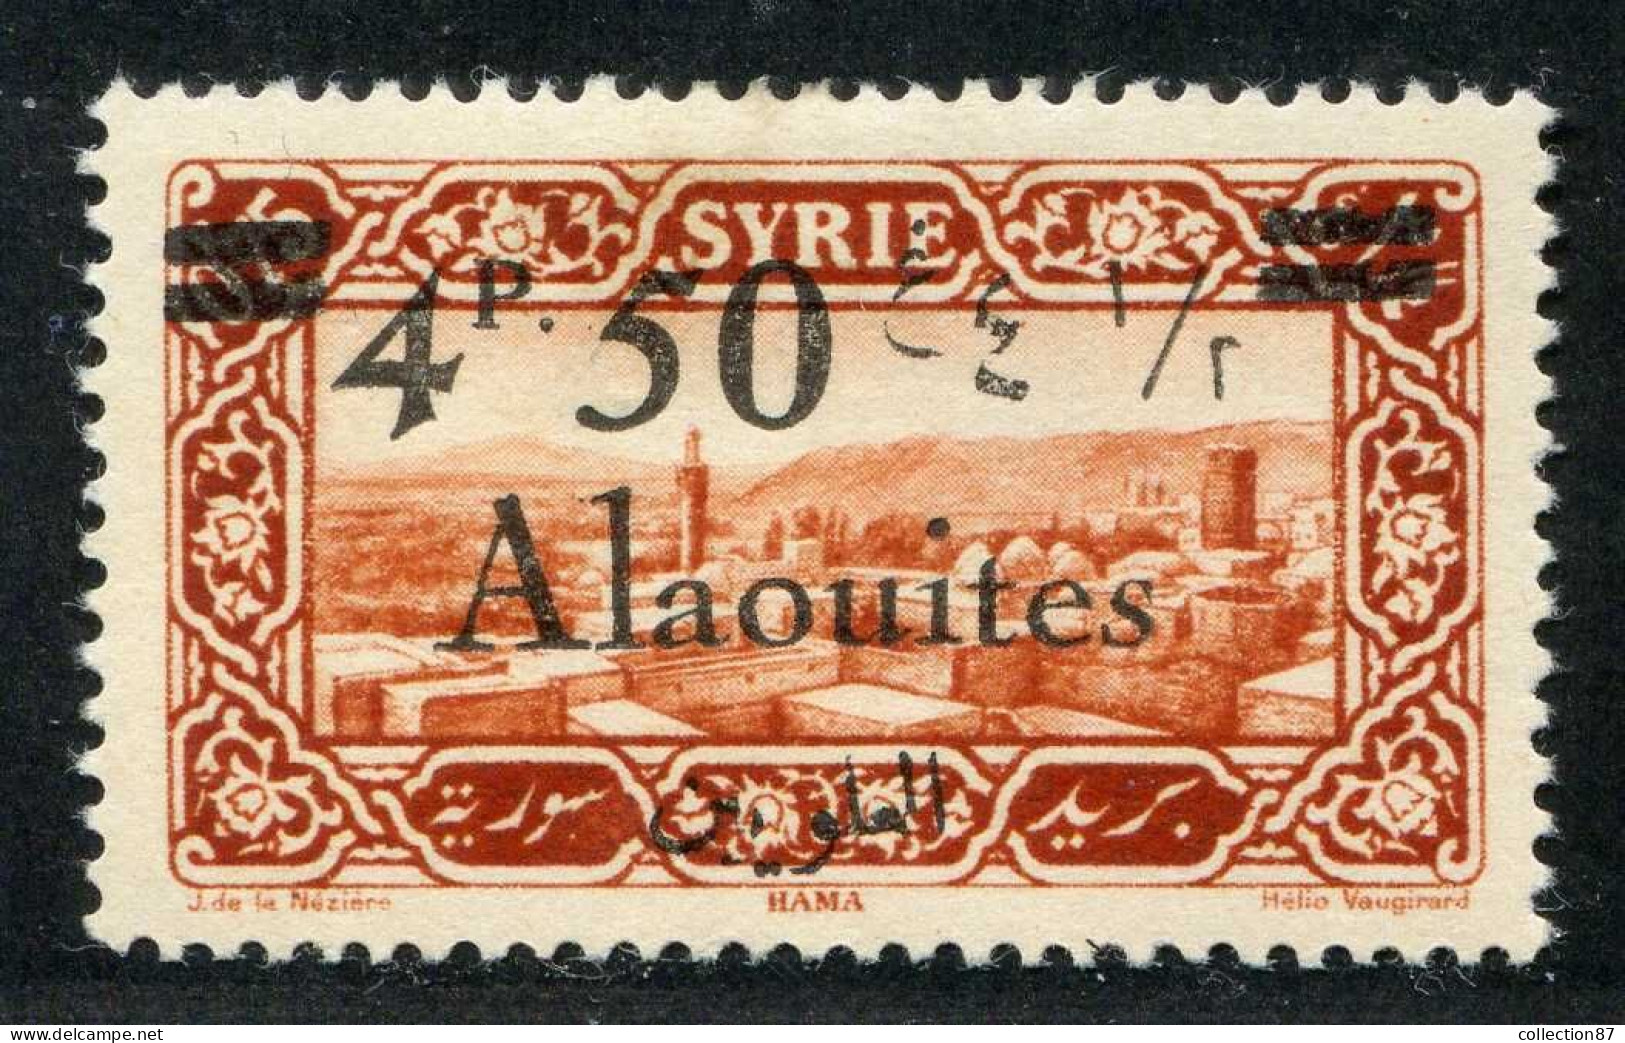 REF 089 > ALAOUITES < N° 44 * < Neuf Ch Dos Visible - MH * - Ongebruikt